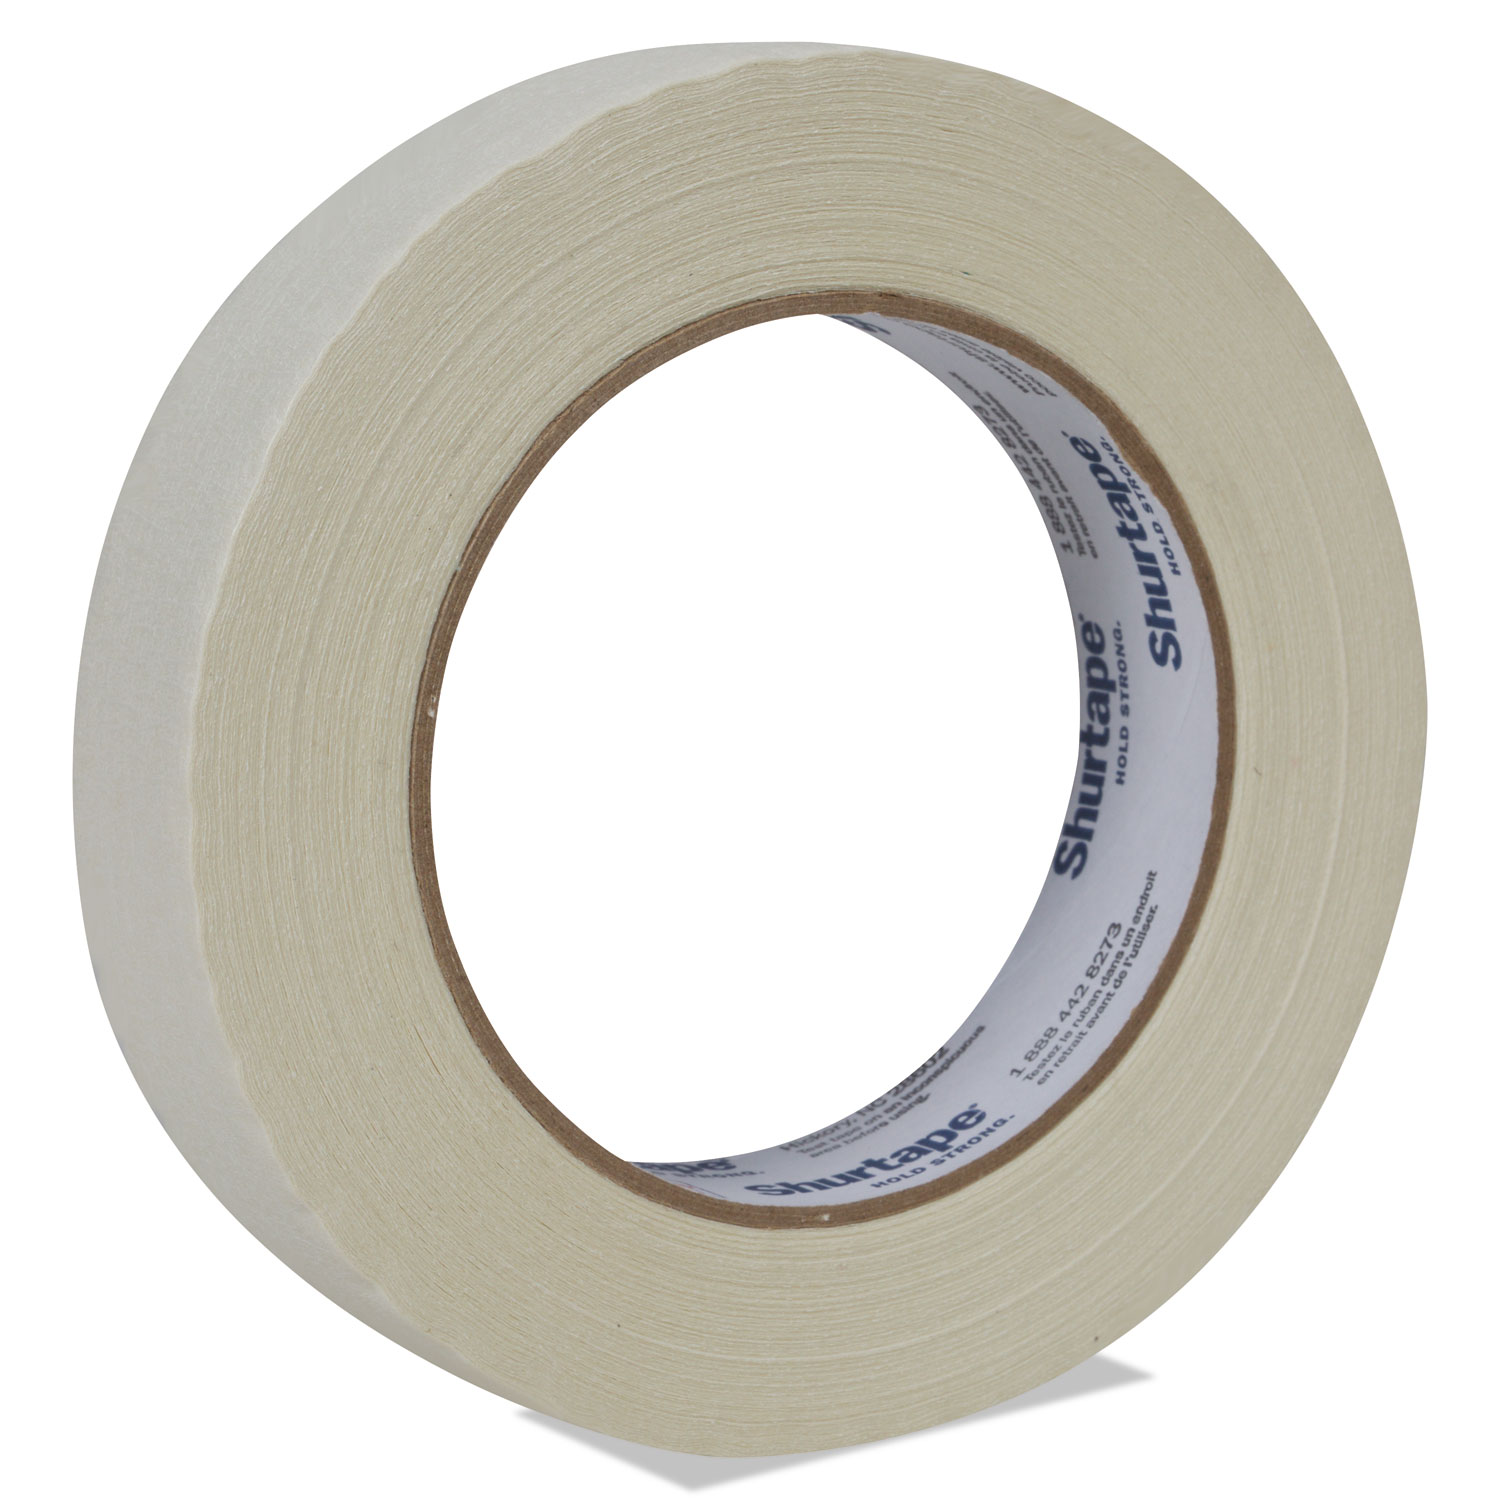 Duck Masking® Color Masking Tape - Yellow, .94 in. x 30 yd. 